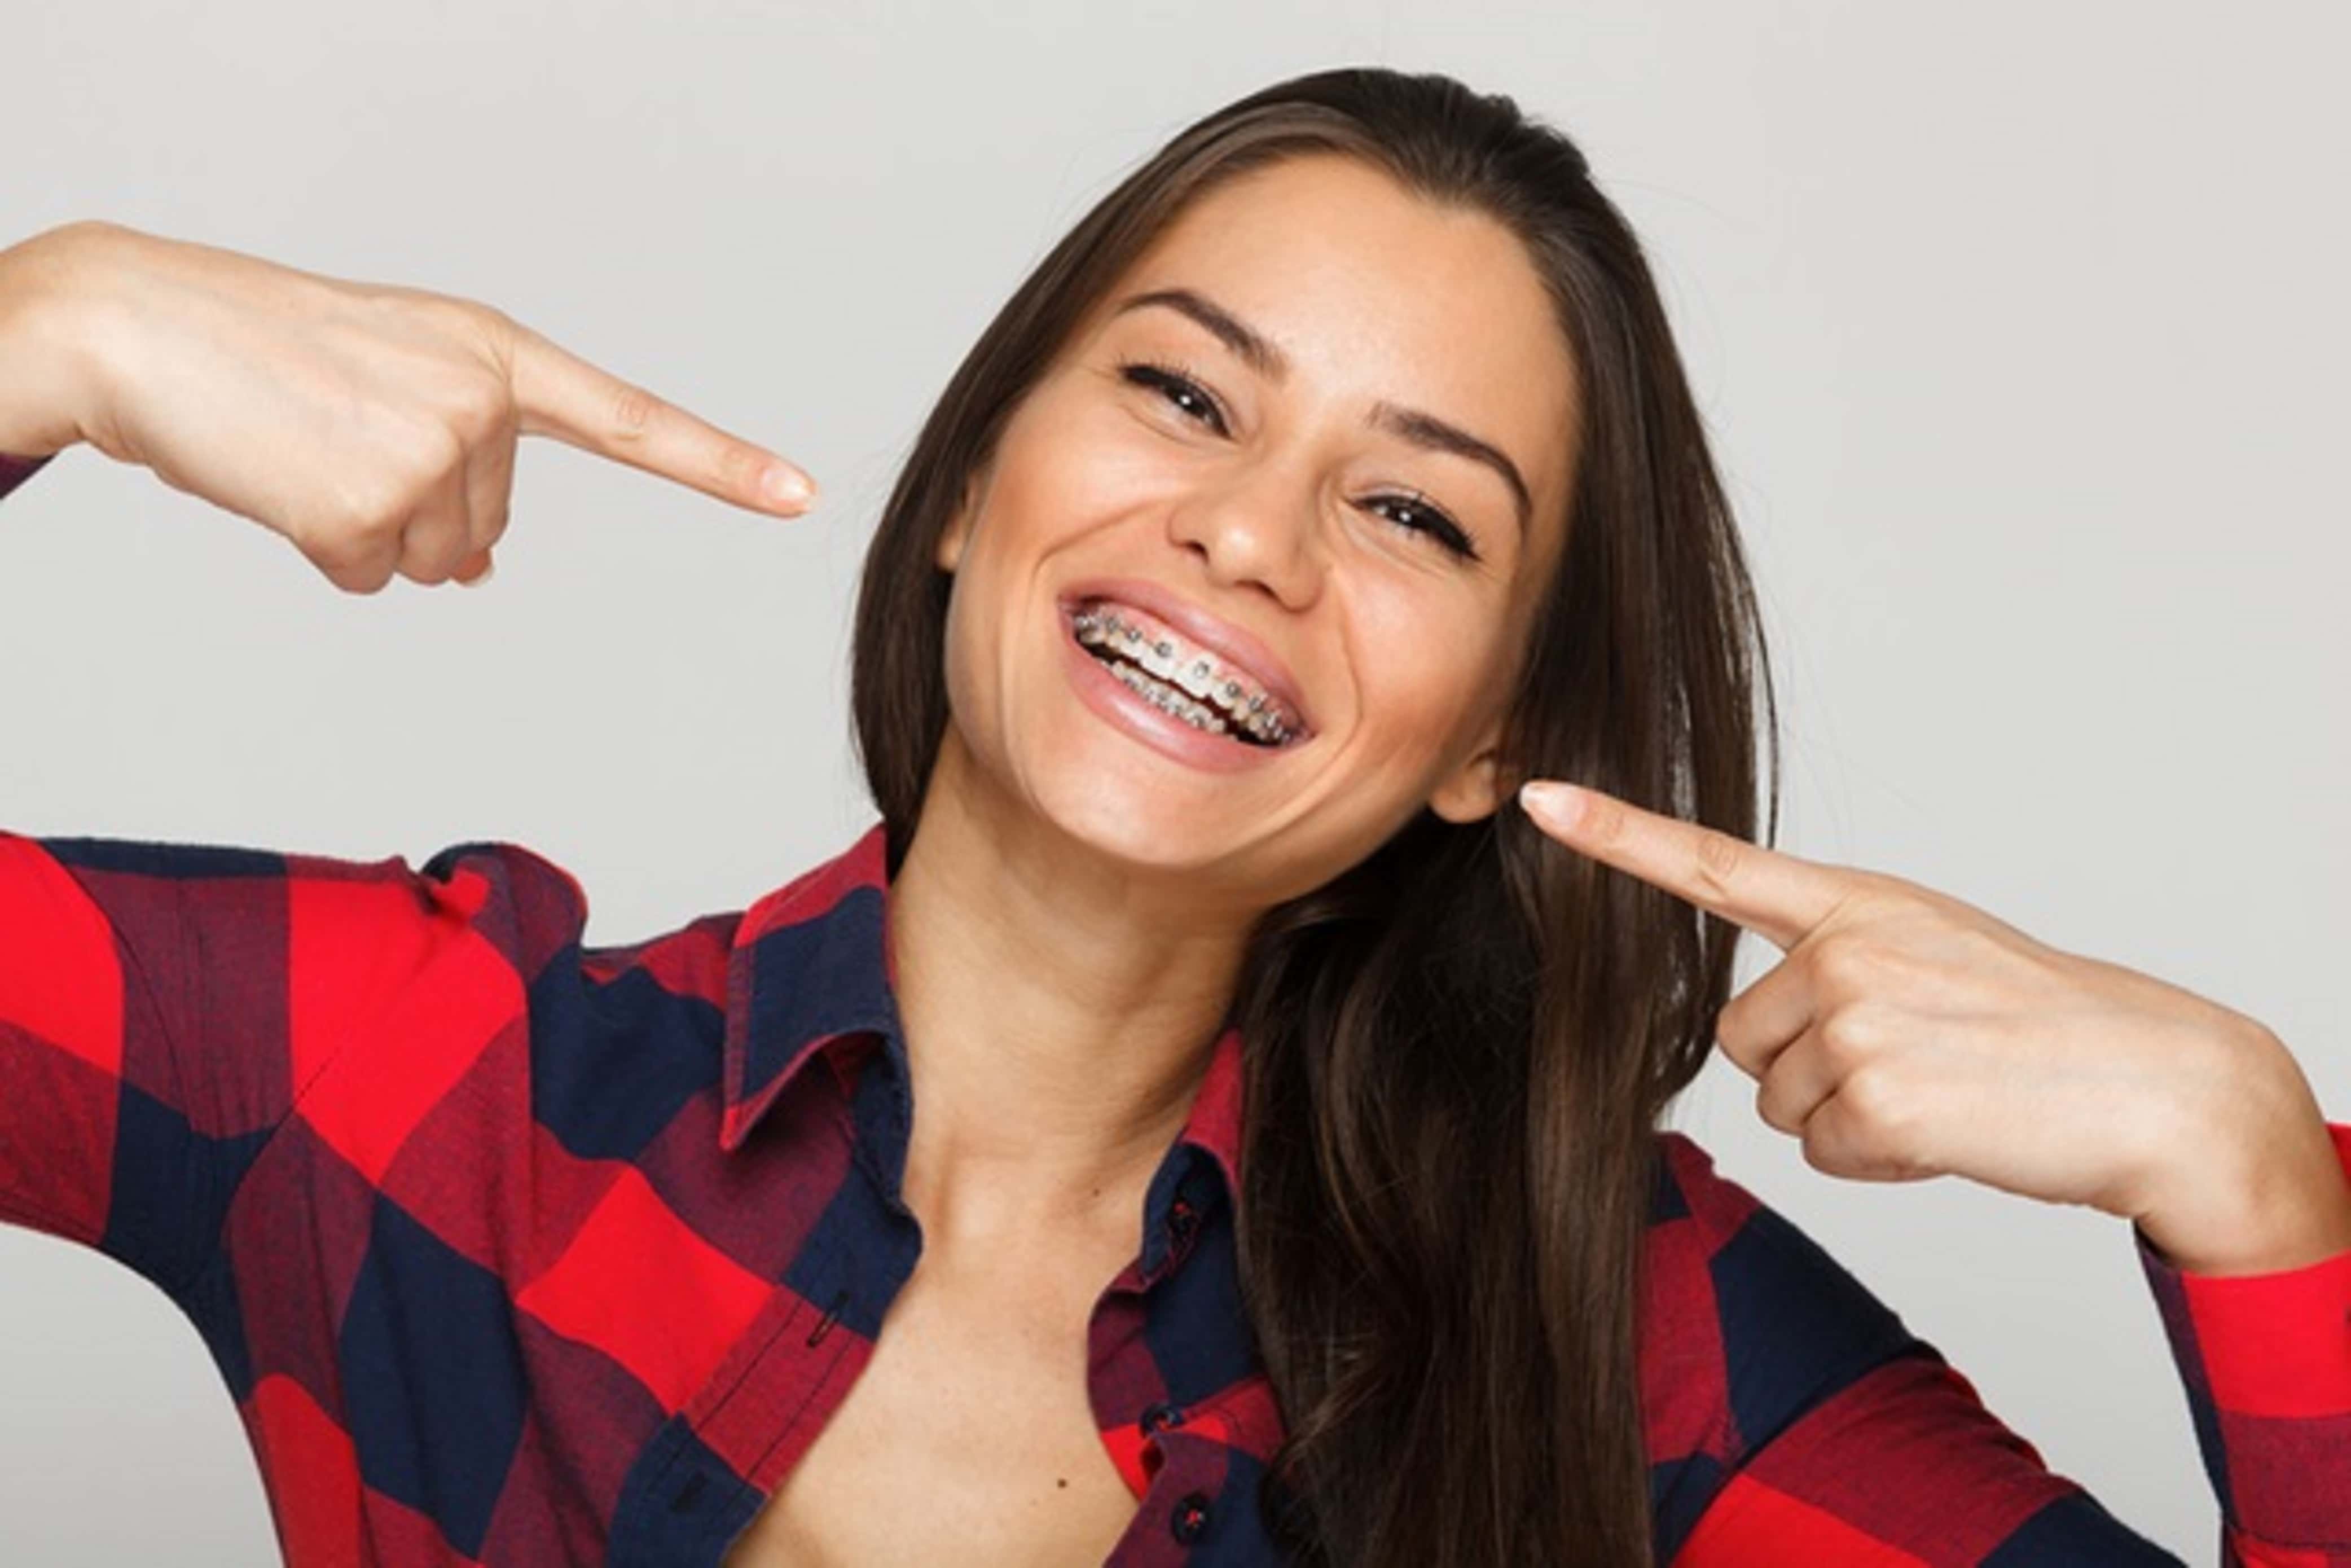 what are your options when it comes to orthodontic treatment